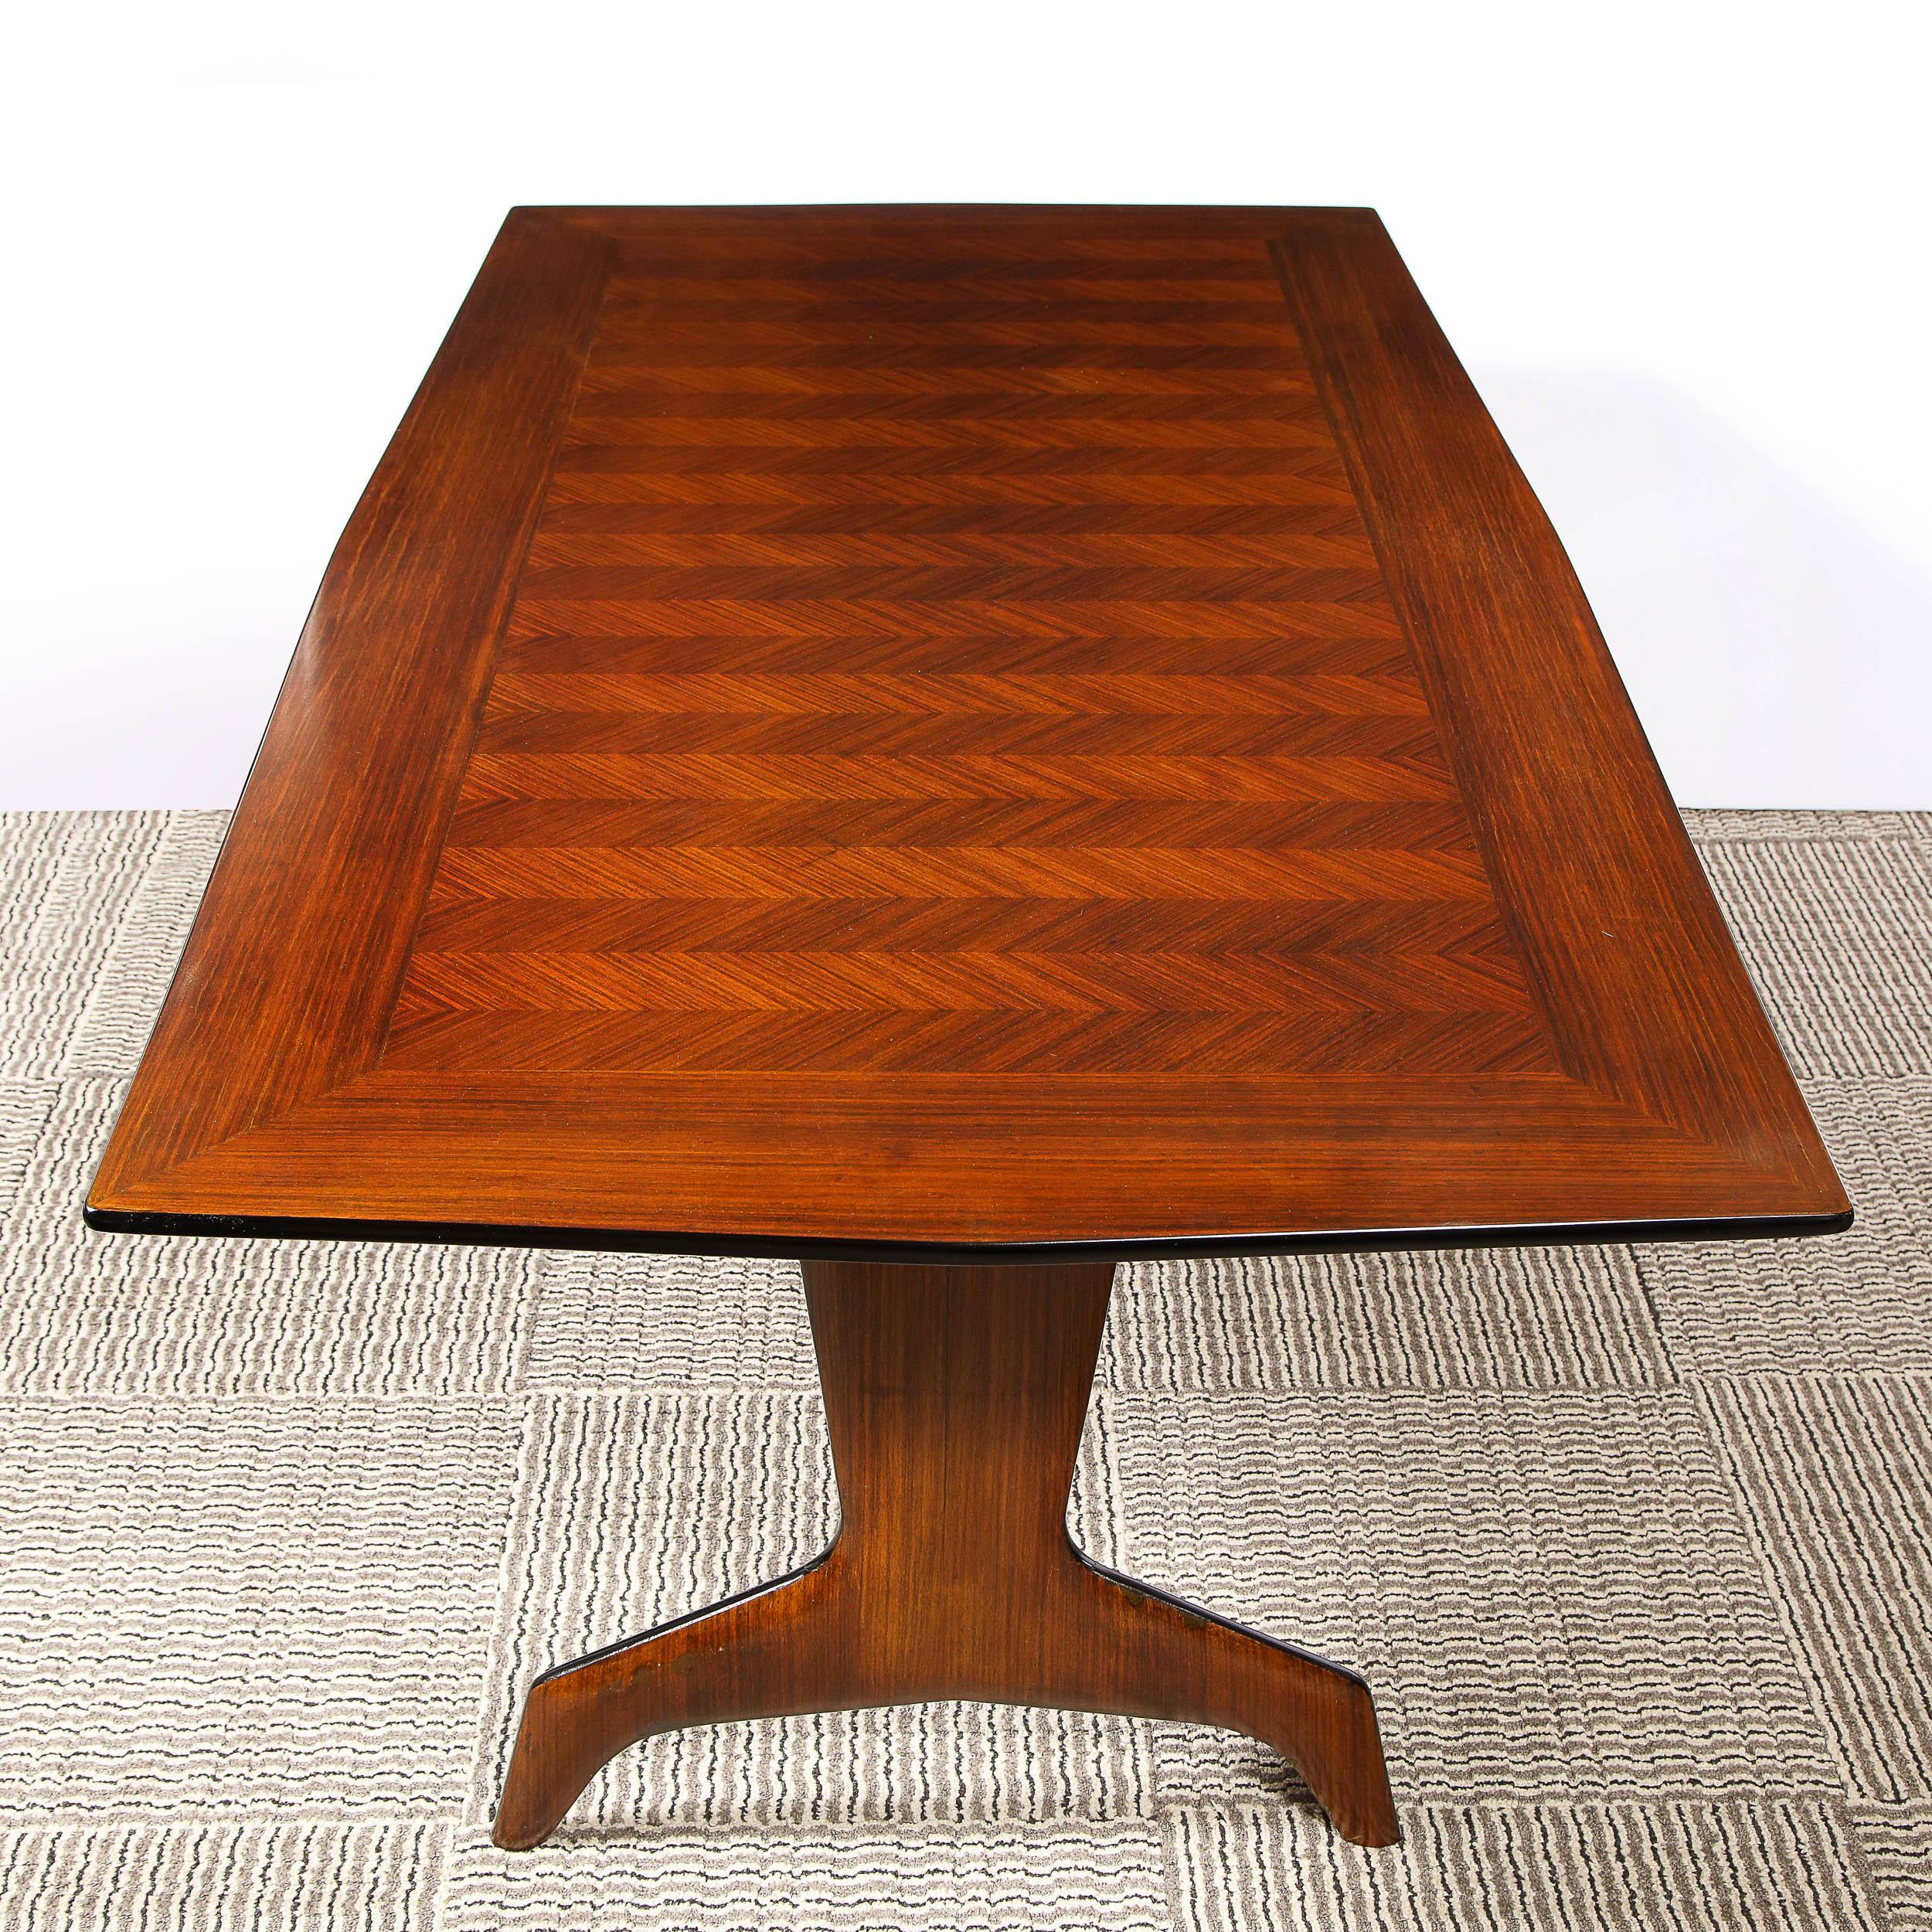 Mid Century Modern Inlaid & Bookmatched Zebrawood Dining Table by Carlo De Carli For Sale 1